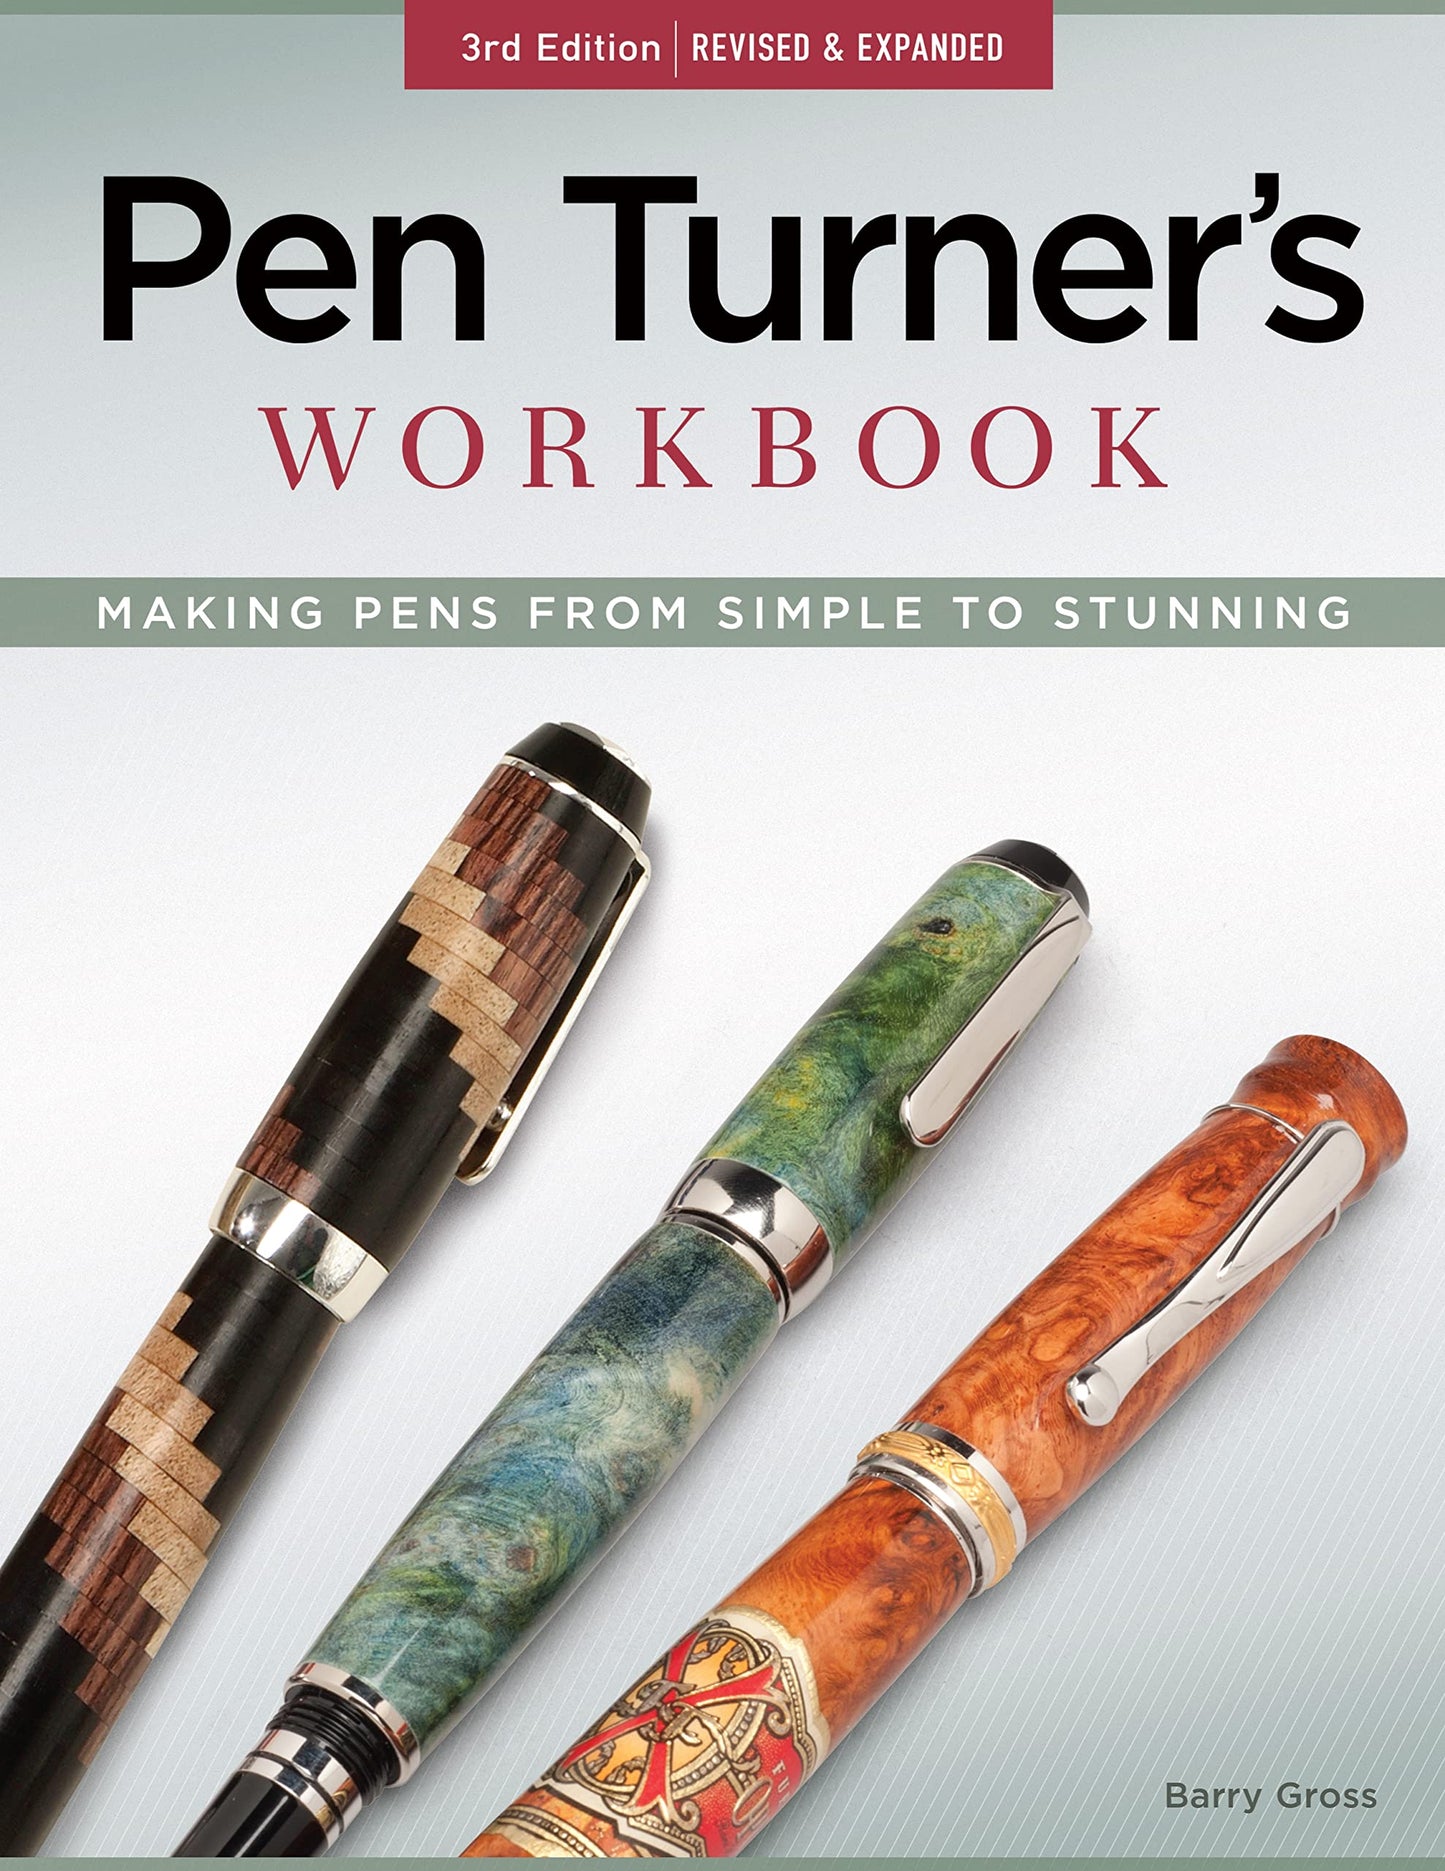 Pen Turner's Workbook, 3rd Edition Revised and Expanded: Making Pens from Simple to Stunning (Fox Chapel Publishing) 18 Pen Turning Projects,